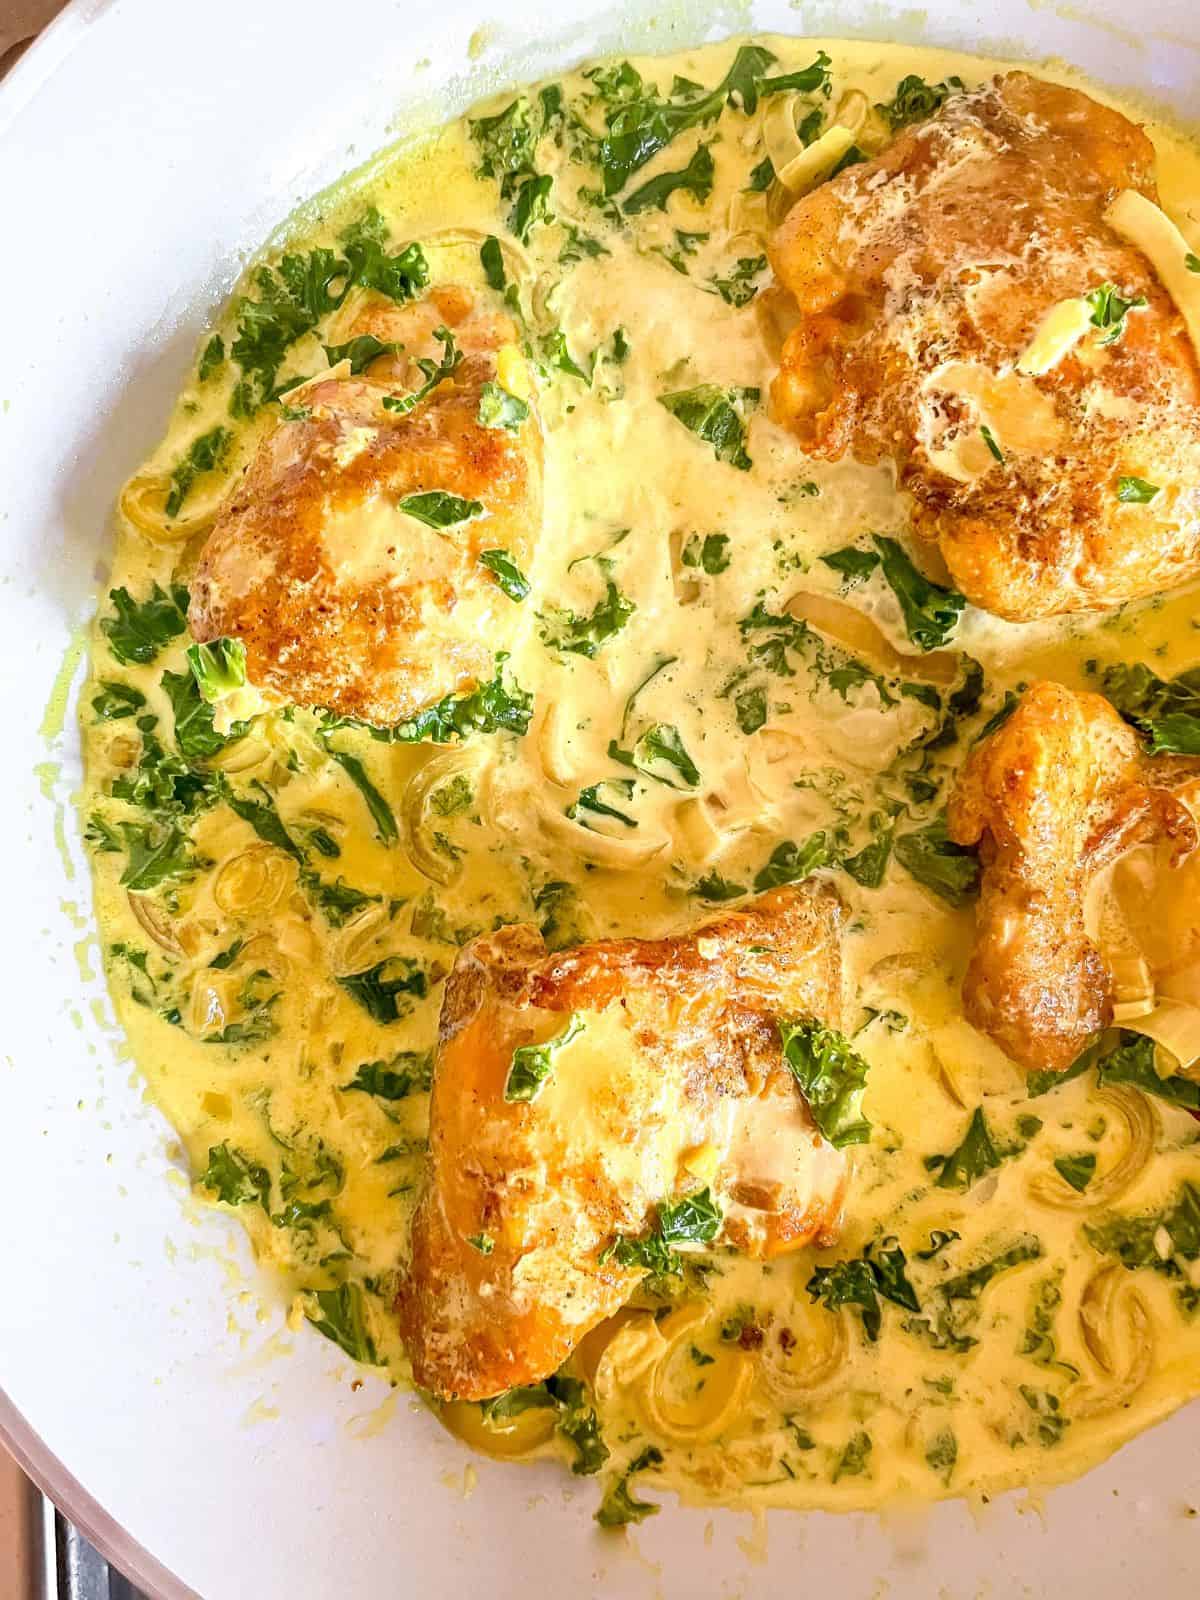 turmeric chicken thighs in a creamy kale sauce in a light grey skillet.